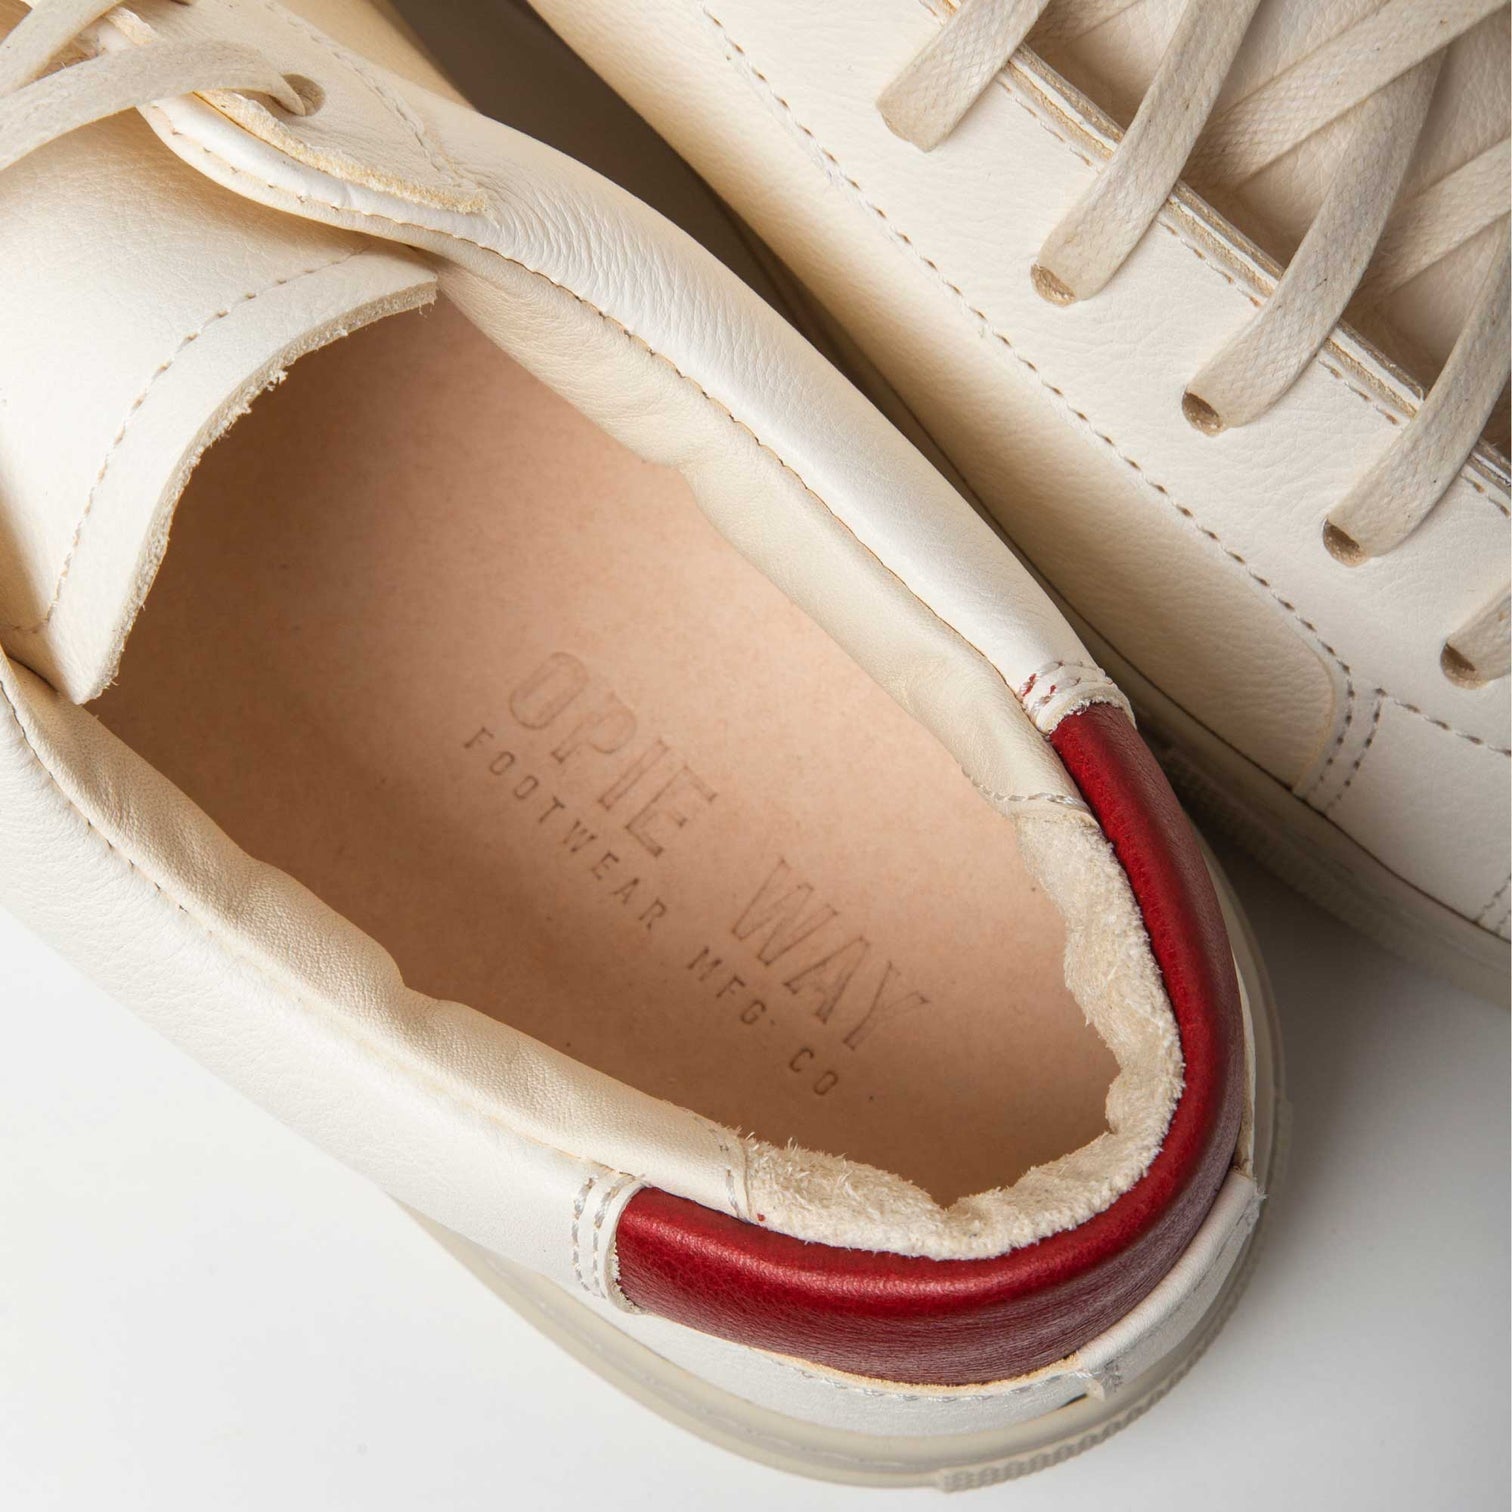 Men's James Court Sneaker | Lo | Ivory and Red